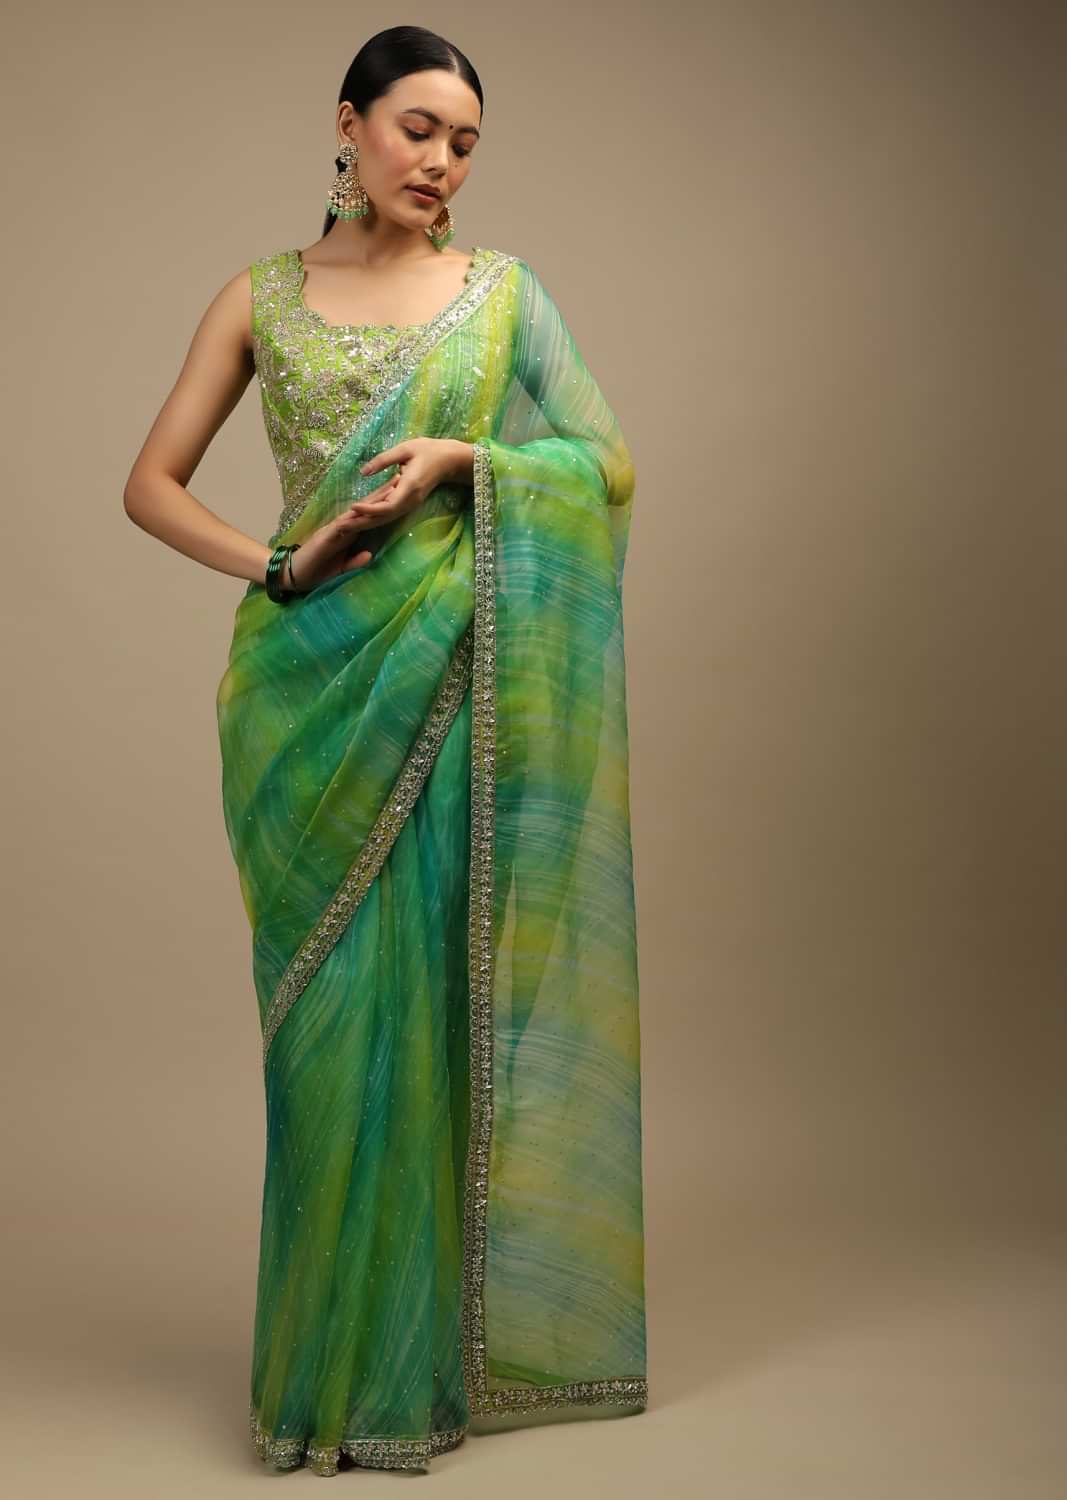 Teal And Lime Shaded Saree In Organza With Lehariya Print, Sequin Accents And Lime Raw Silk Blouse With Embroidered Jaal  